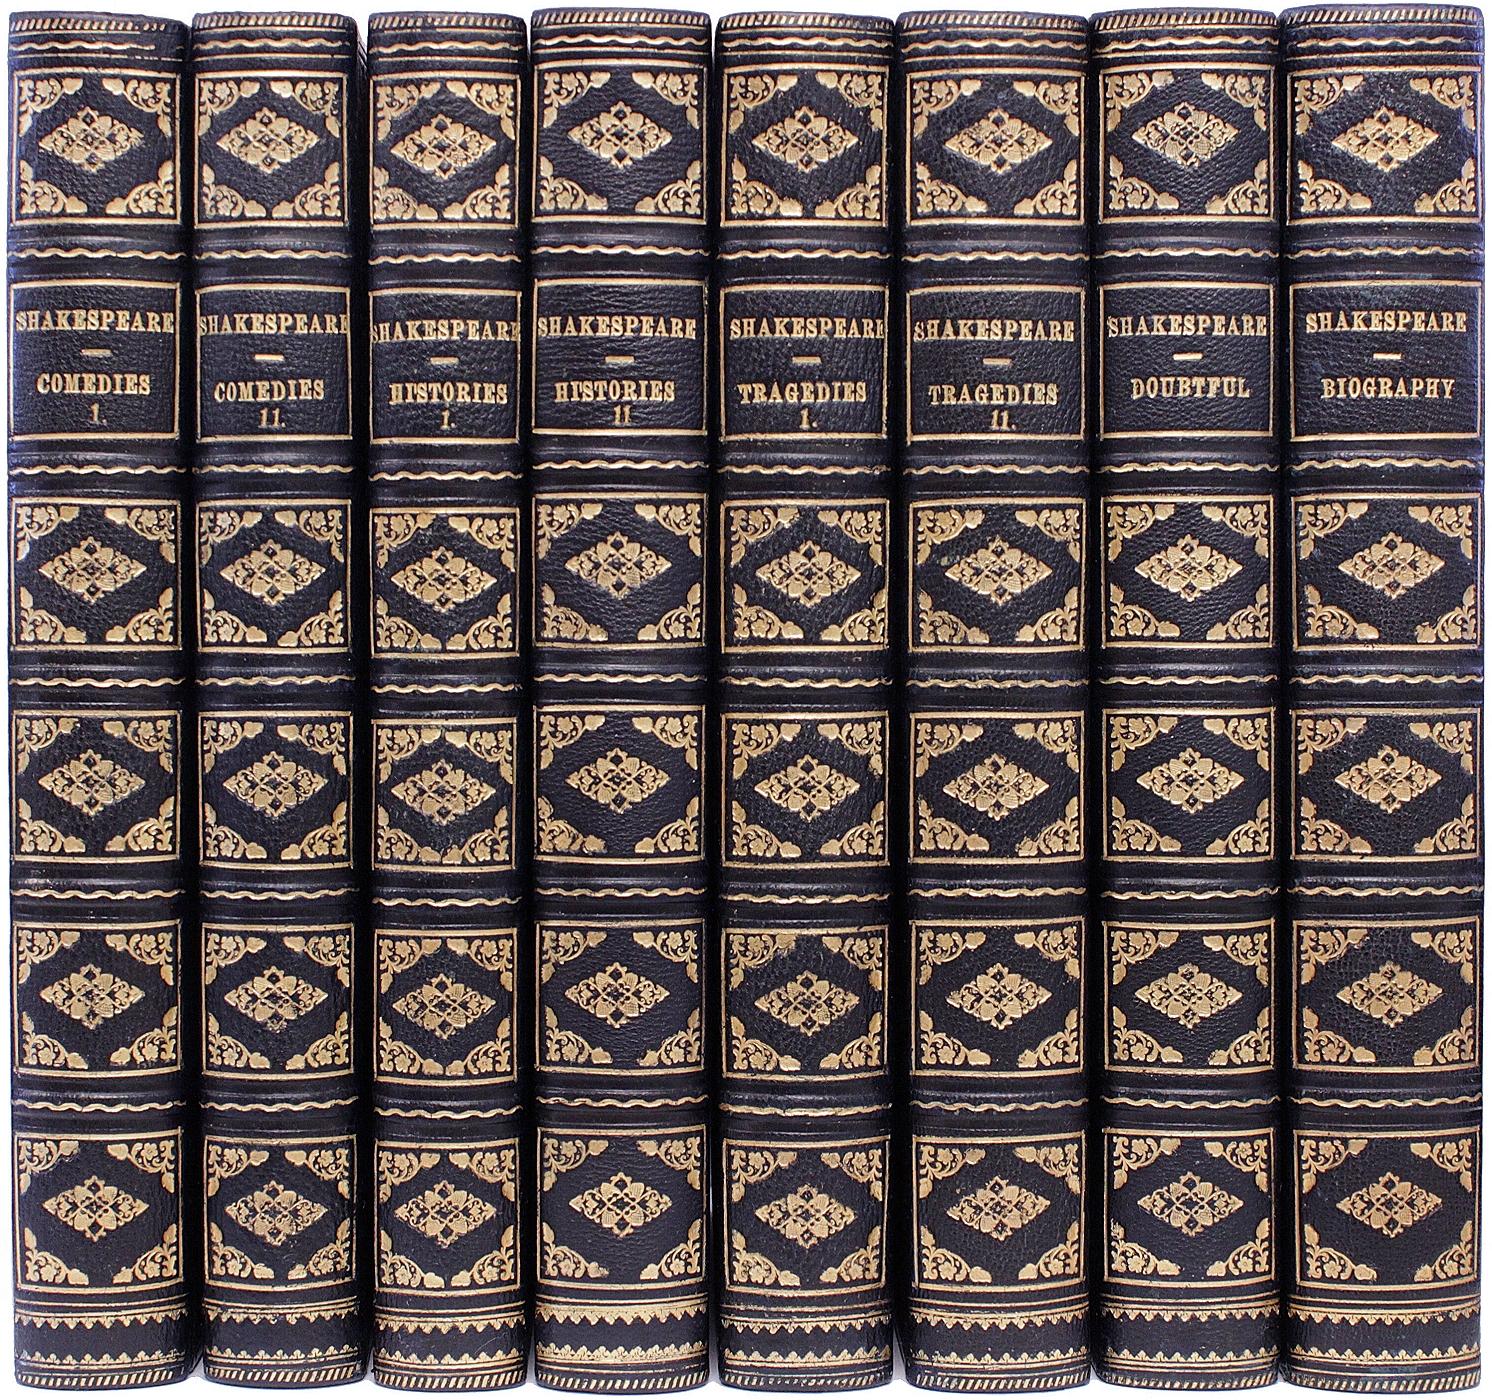 AUTHOR: SHAKESPEARE, William. 

TITLE: The Pictorial Edition Of The Works Of William Shakespeare. Comedies, Histories, Tragedies, & Biography.

PUBLISHER: London: George Routledge & Sons, 1867.

DESCRIPTION: SECOND EDITION REVISED. 8 vols., quarto,